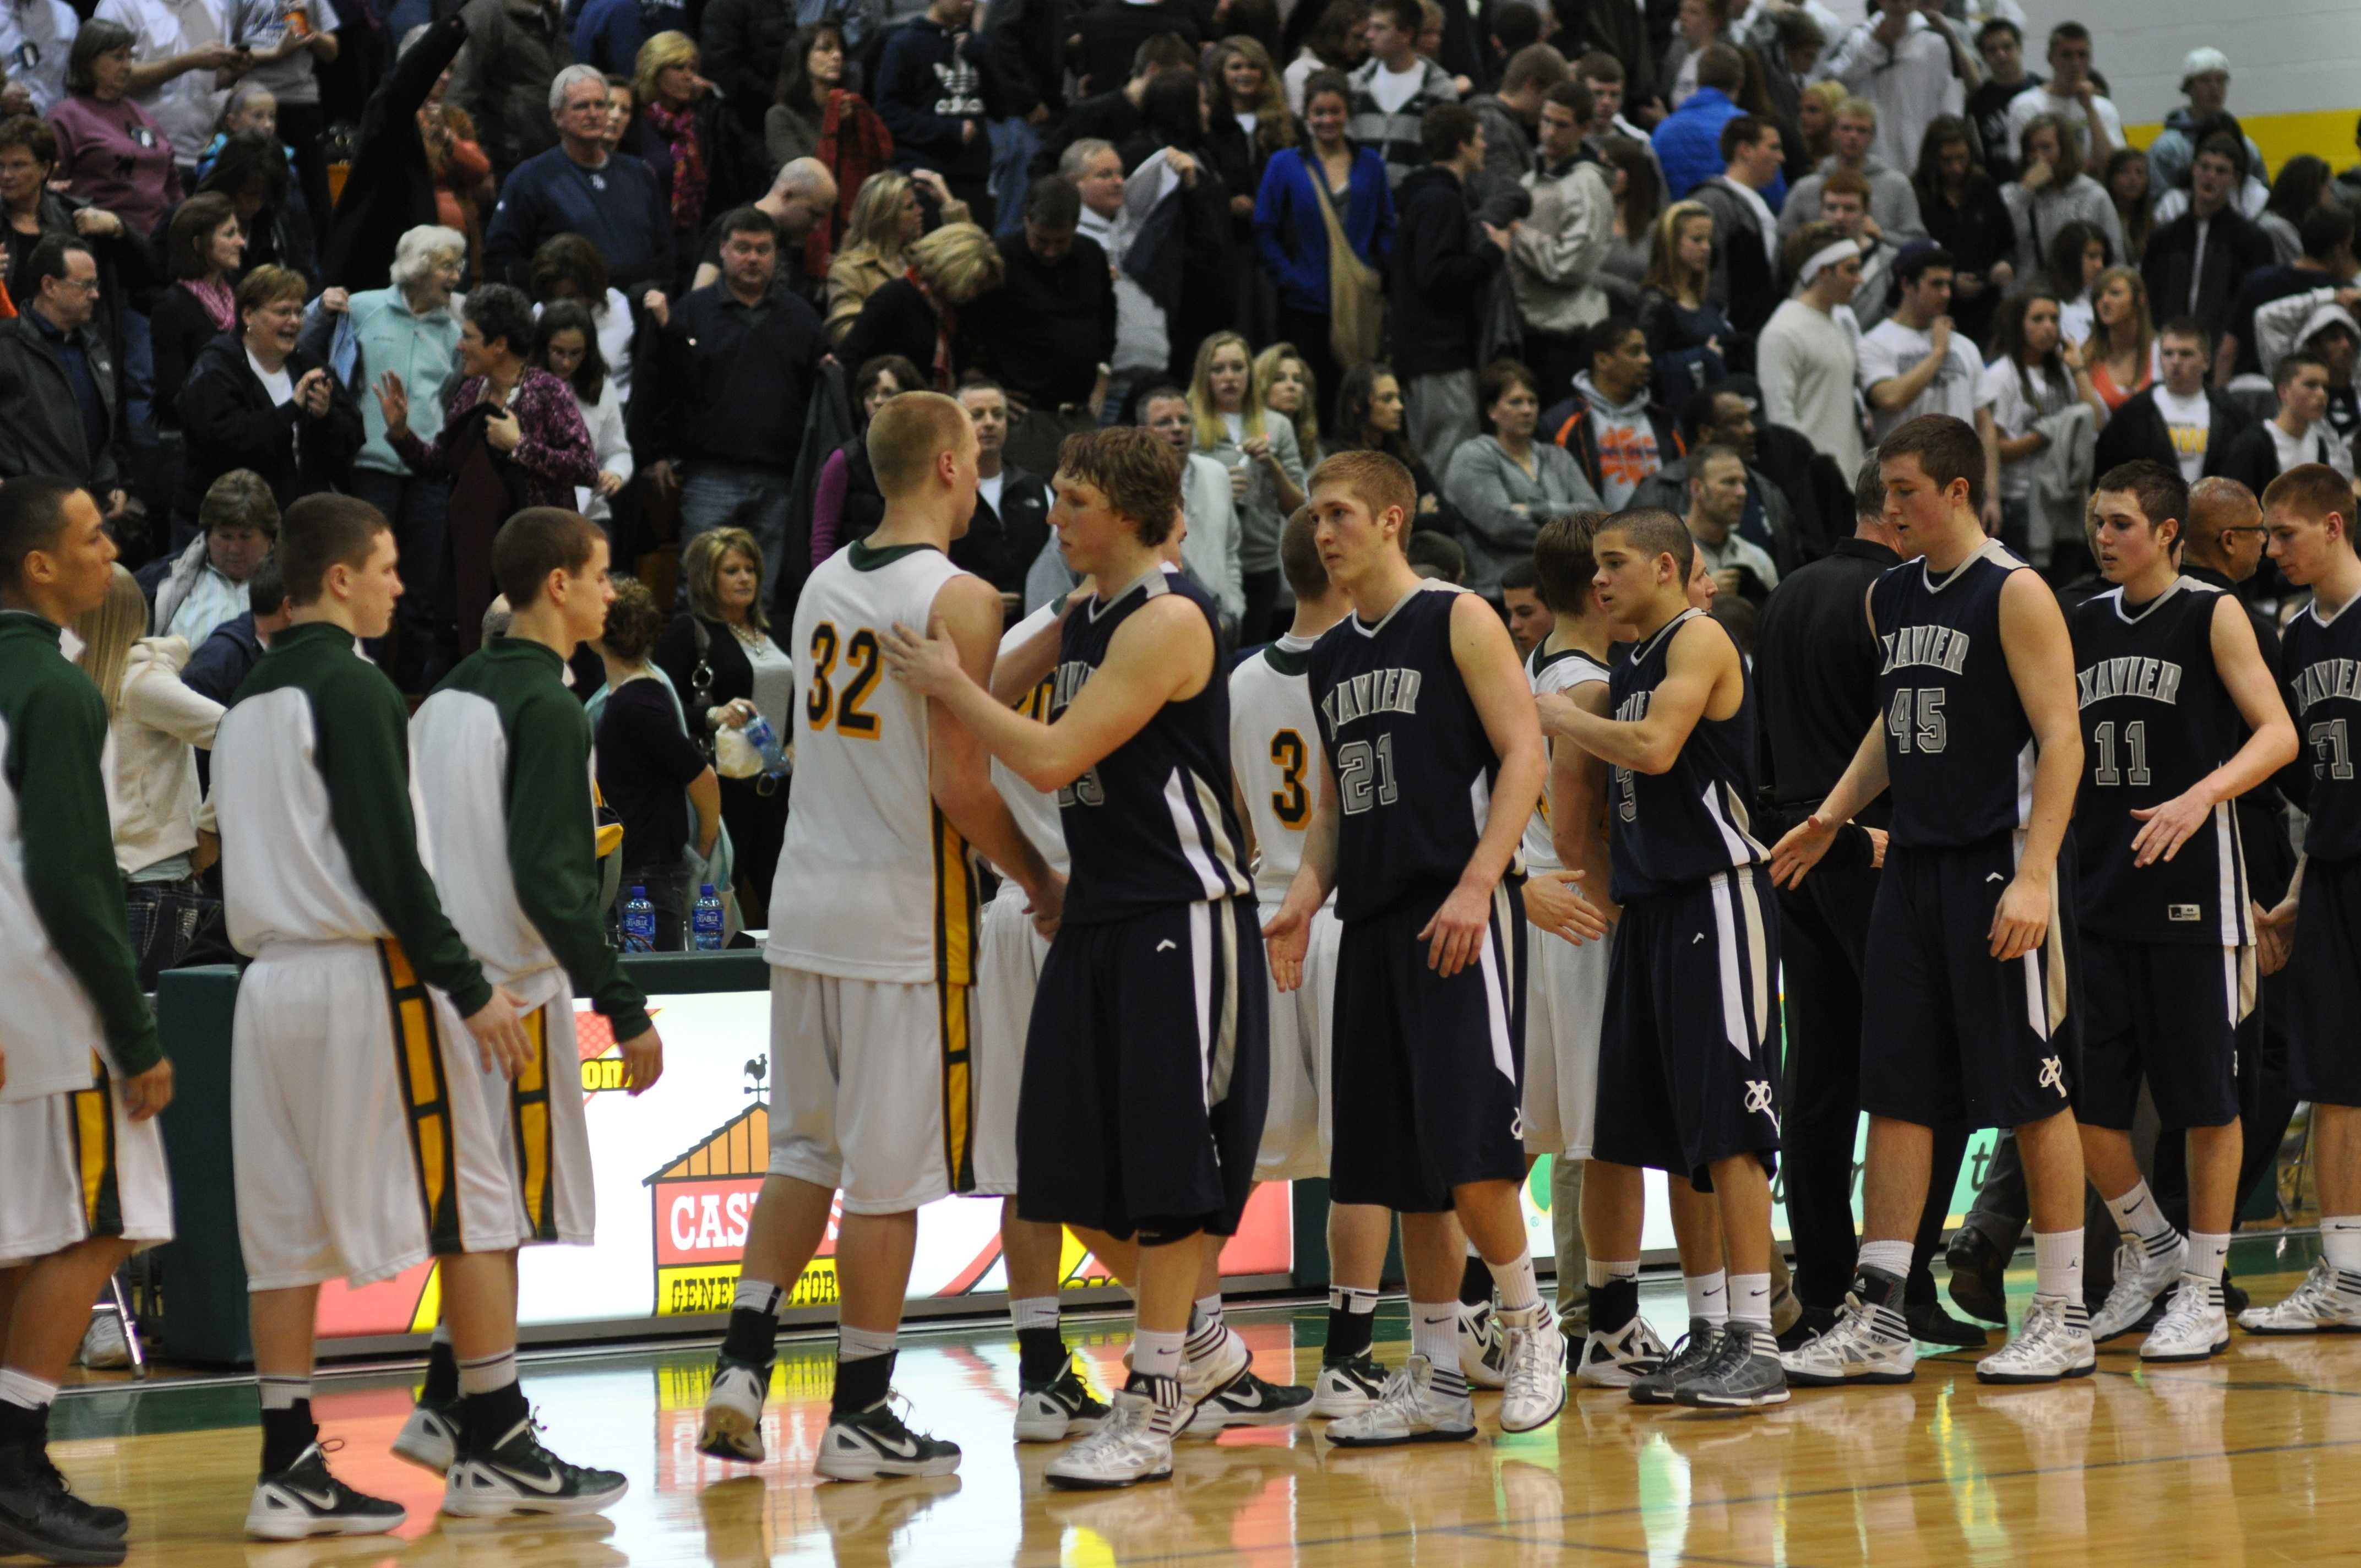 Kennedy and Xavier players tell each other good game after the Cougars defeated the Saints 59 to 45.